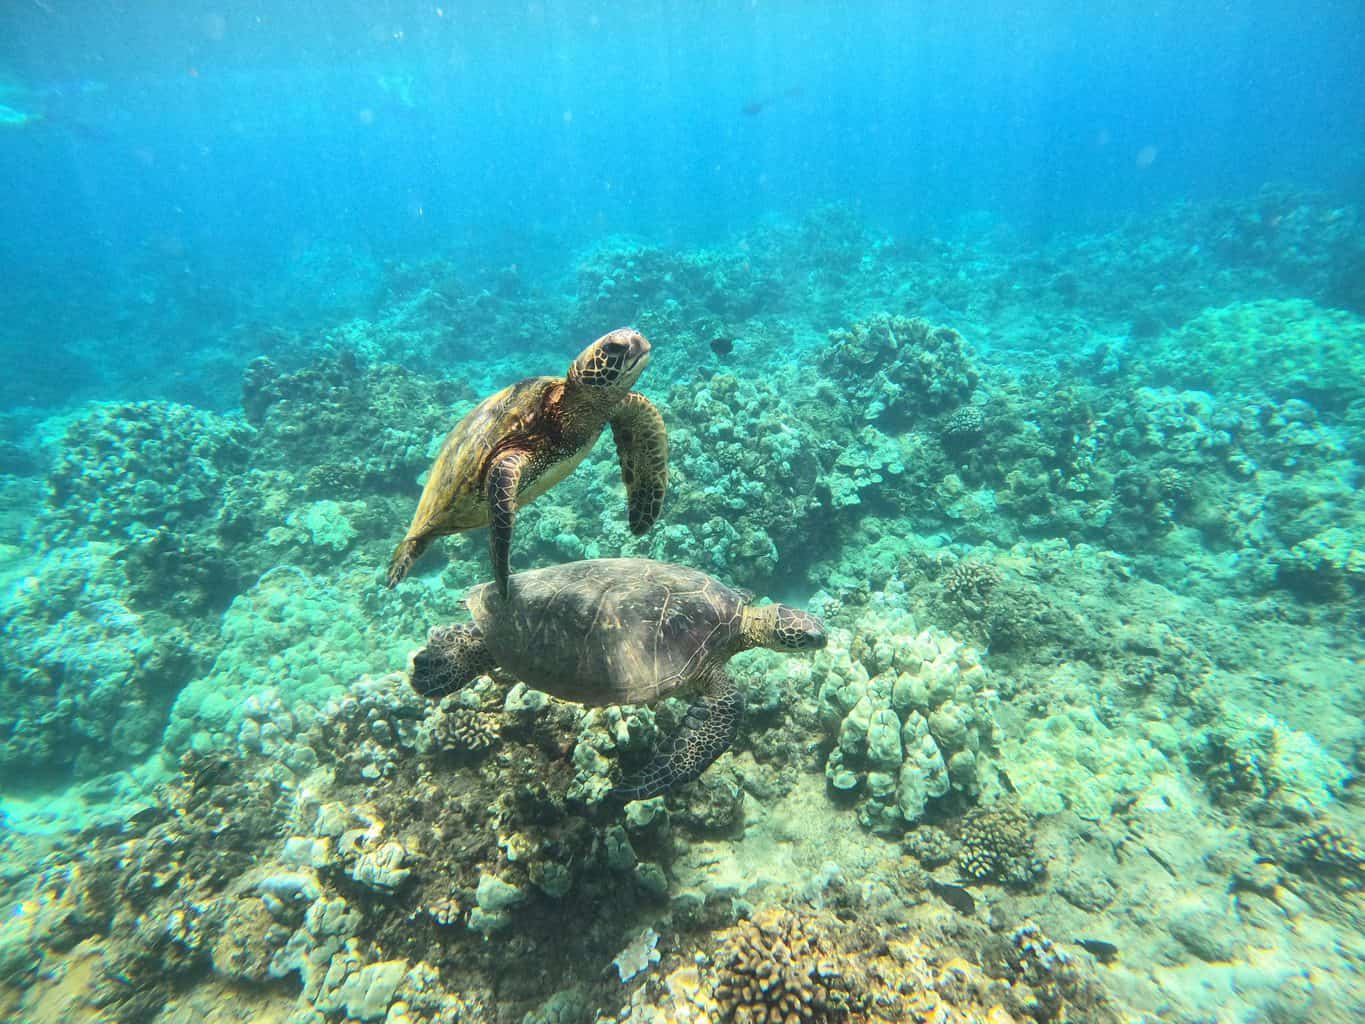 https://thedailyadventuresofme.com/wp-content/uploads/2022/03/Sea-Turtles-in-Maui-scaled.jpg